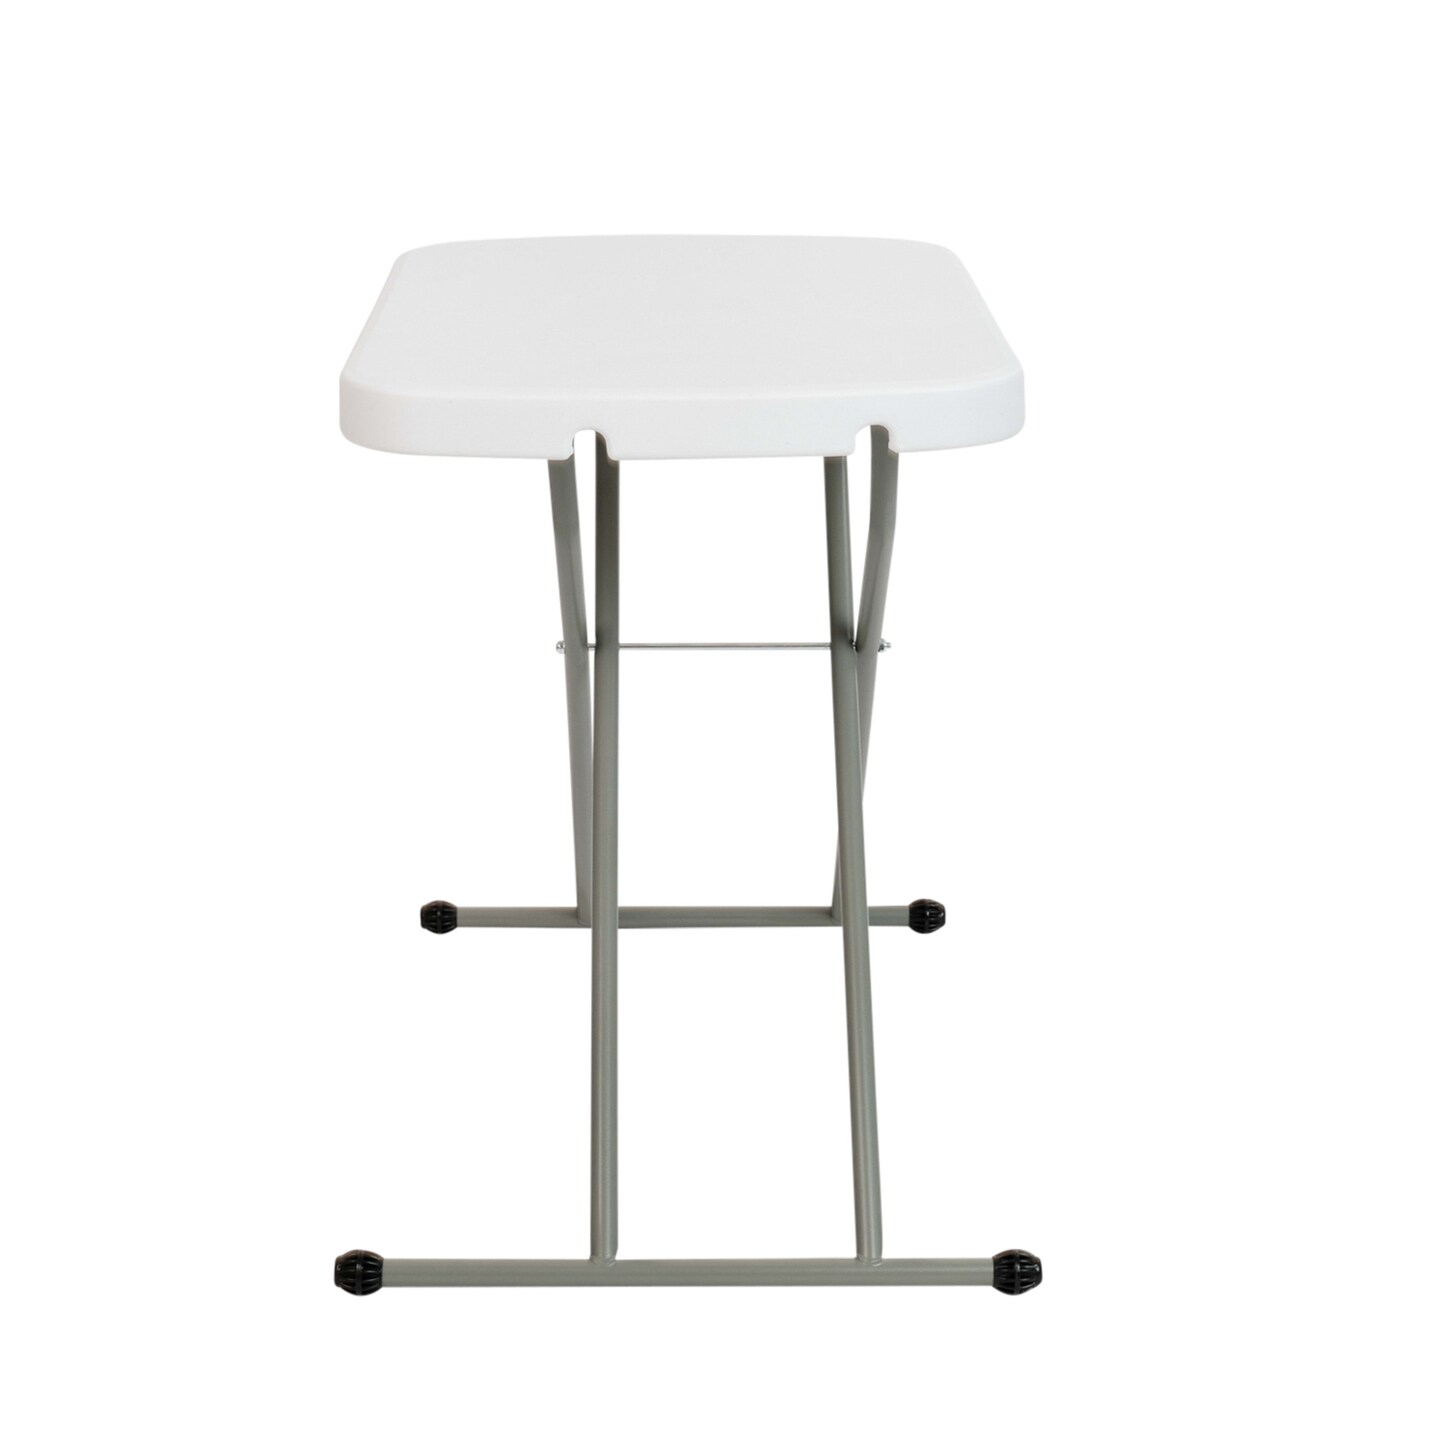 Emma and Oliver Height Adjustable Plastic Folding TV Tray/Laptop Table in Granite White